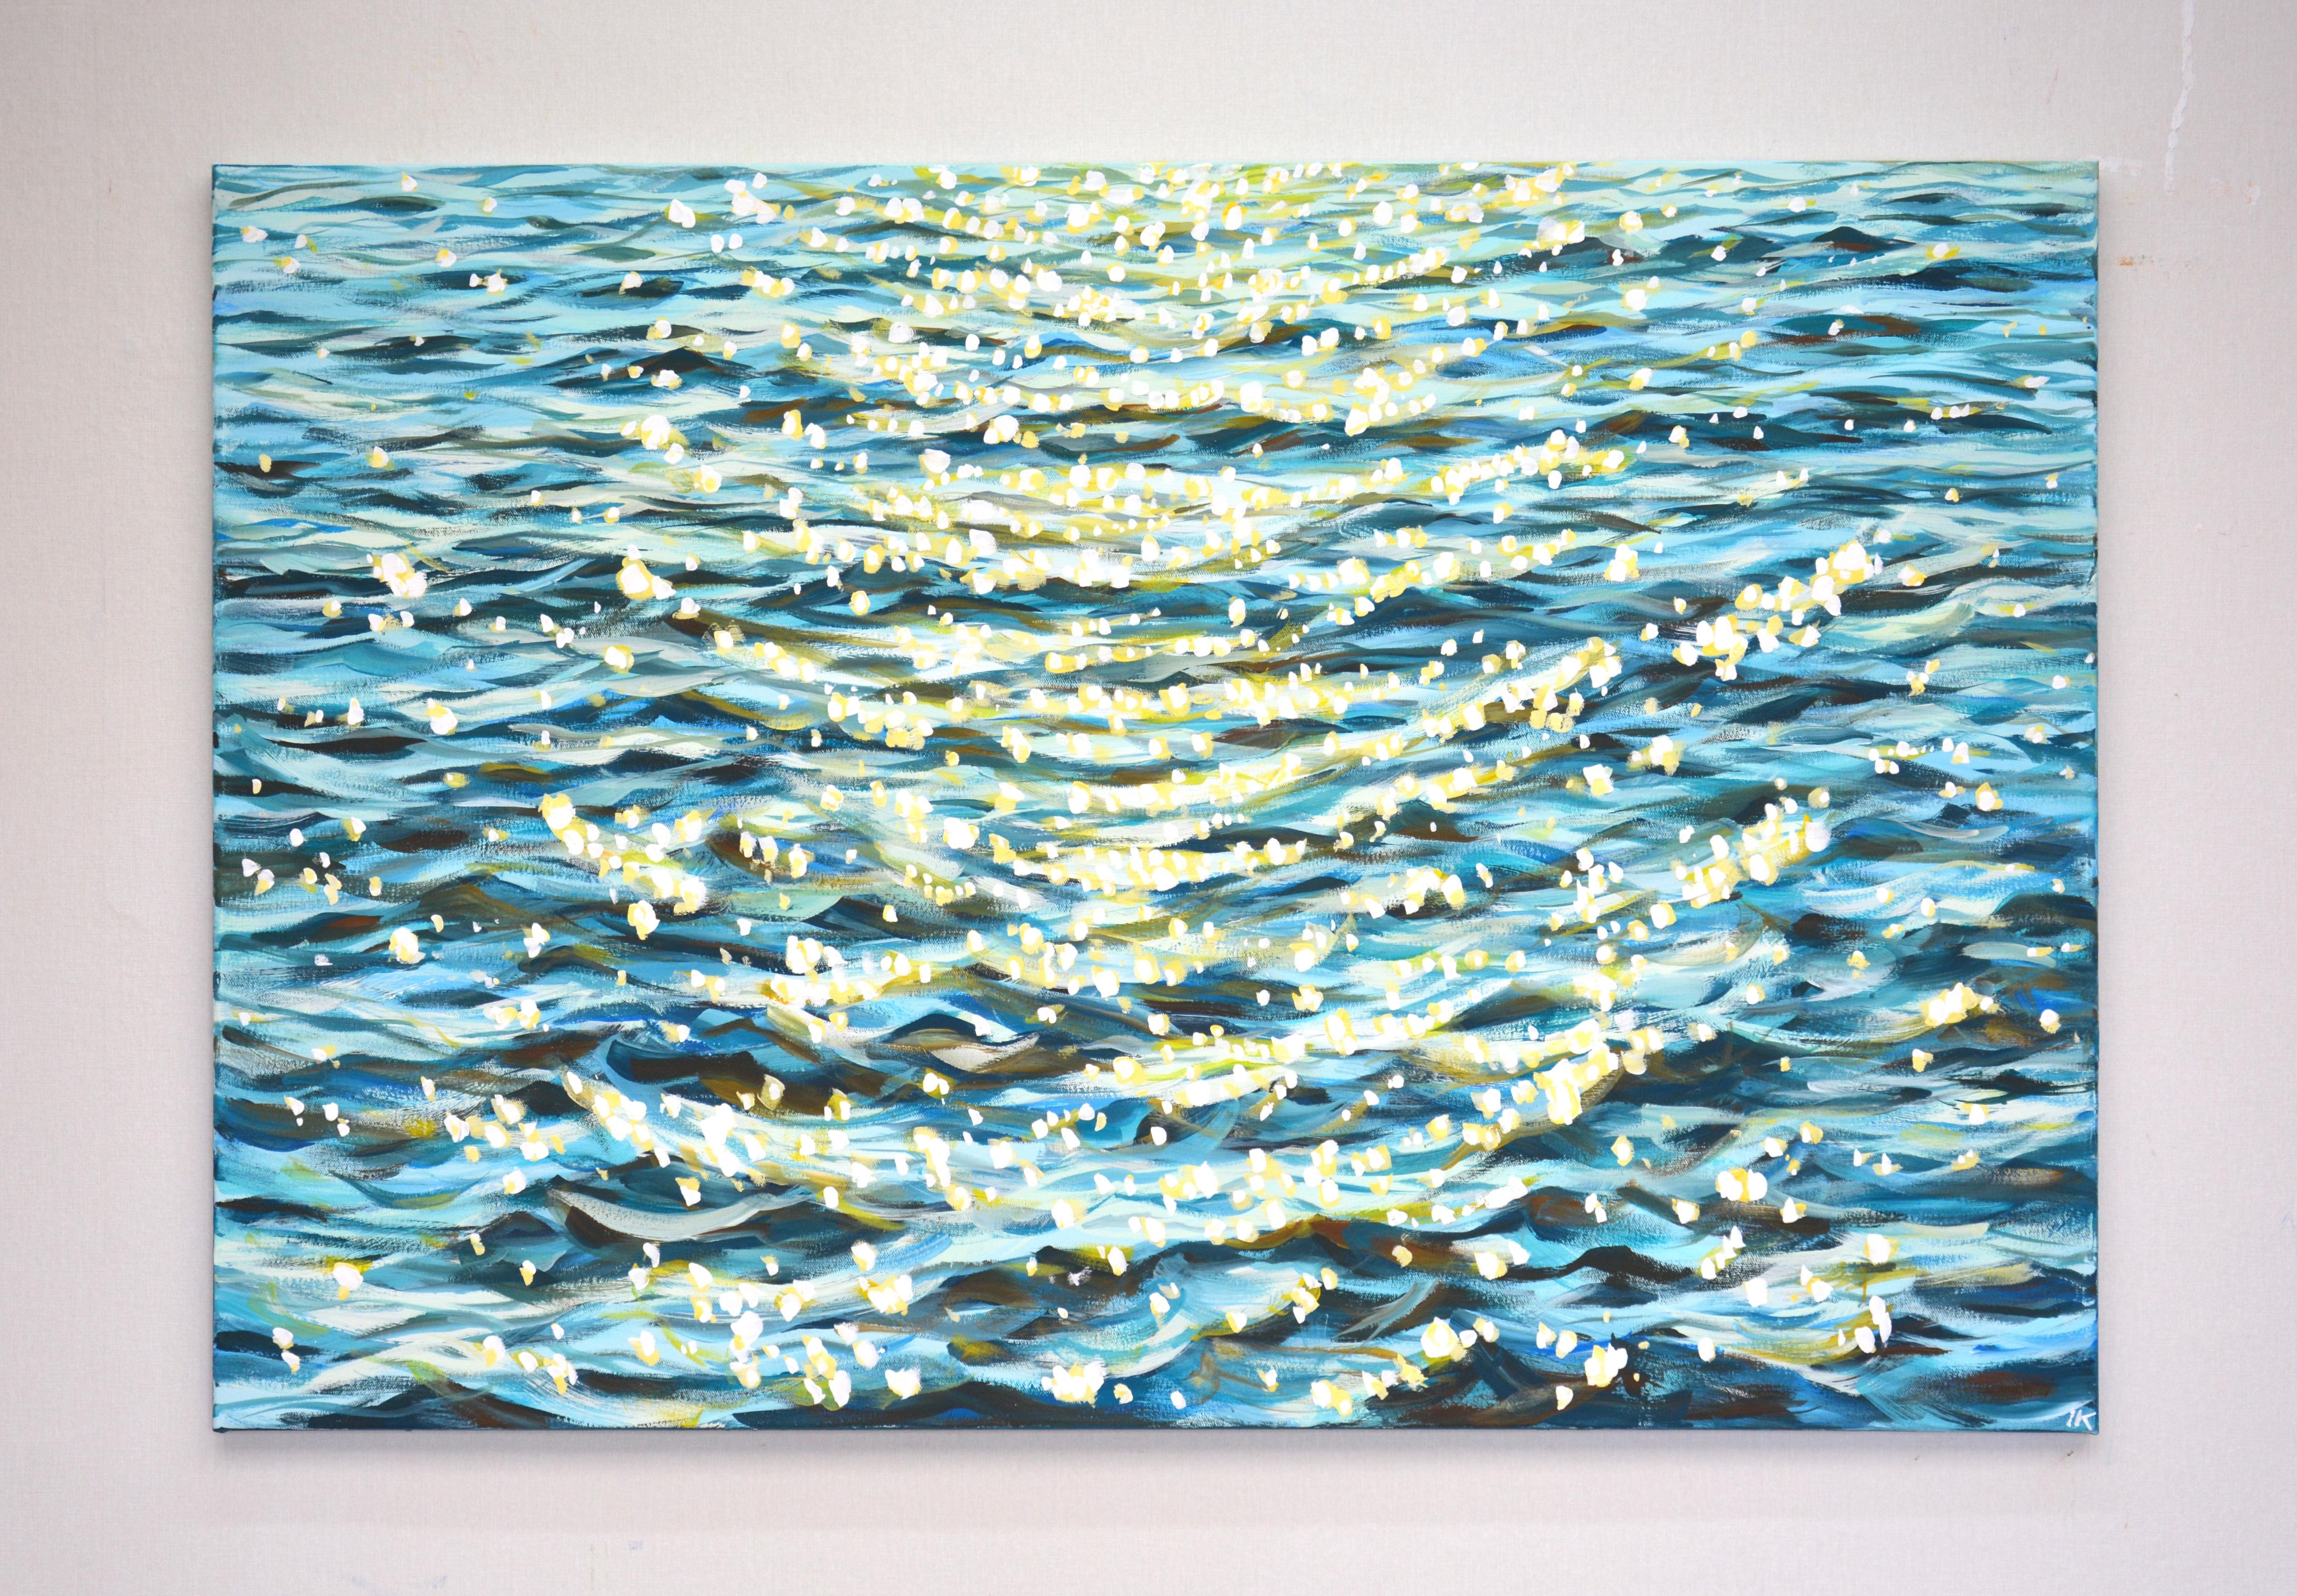 				Light on the water 2. - Painting by Iryna Kastsova